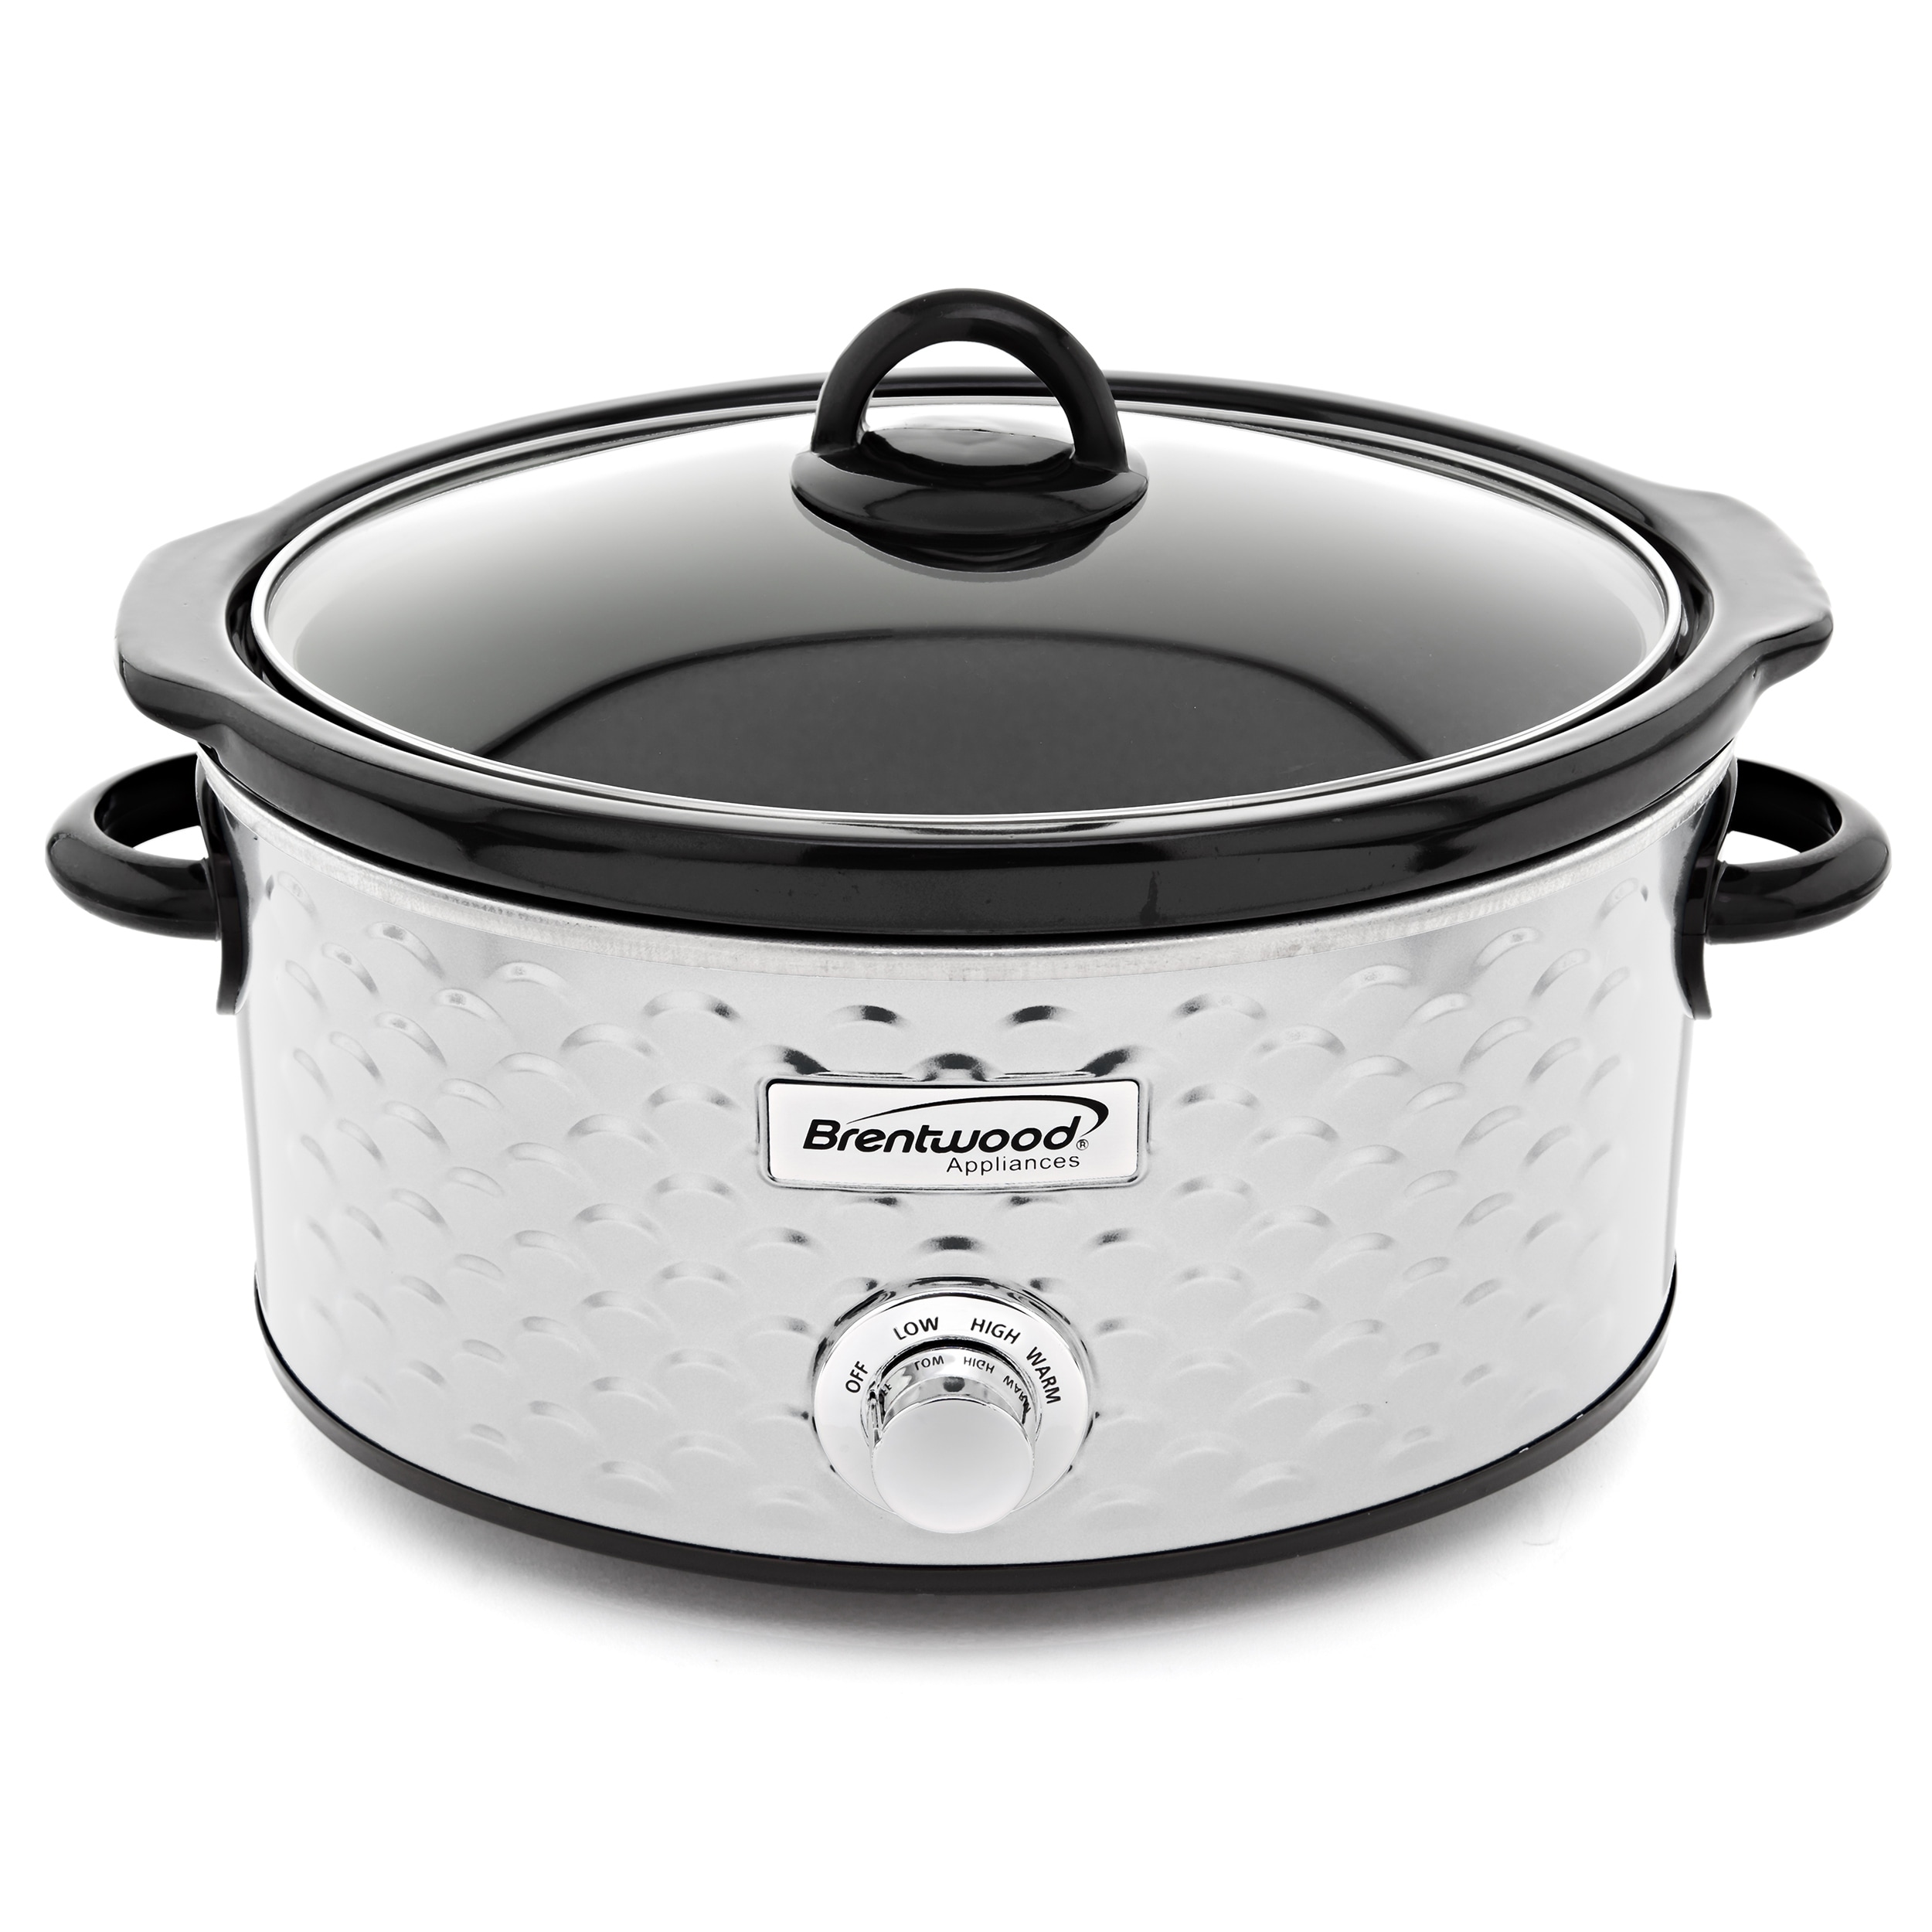 https://ak1.ostkcdn.com/images/products/is/images/direct/d565ed90a1674ce9f7b14ffc3e1dd624db04bea2/Brentwood-Scallop-Pattern-4.5-Quart-Slow-Cooker-in-Stainless-Steel.jpg